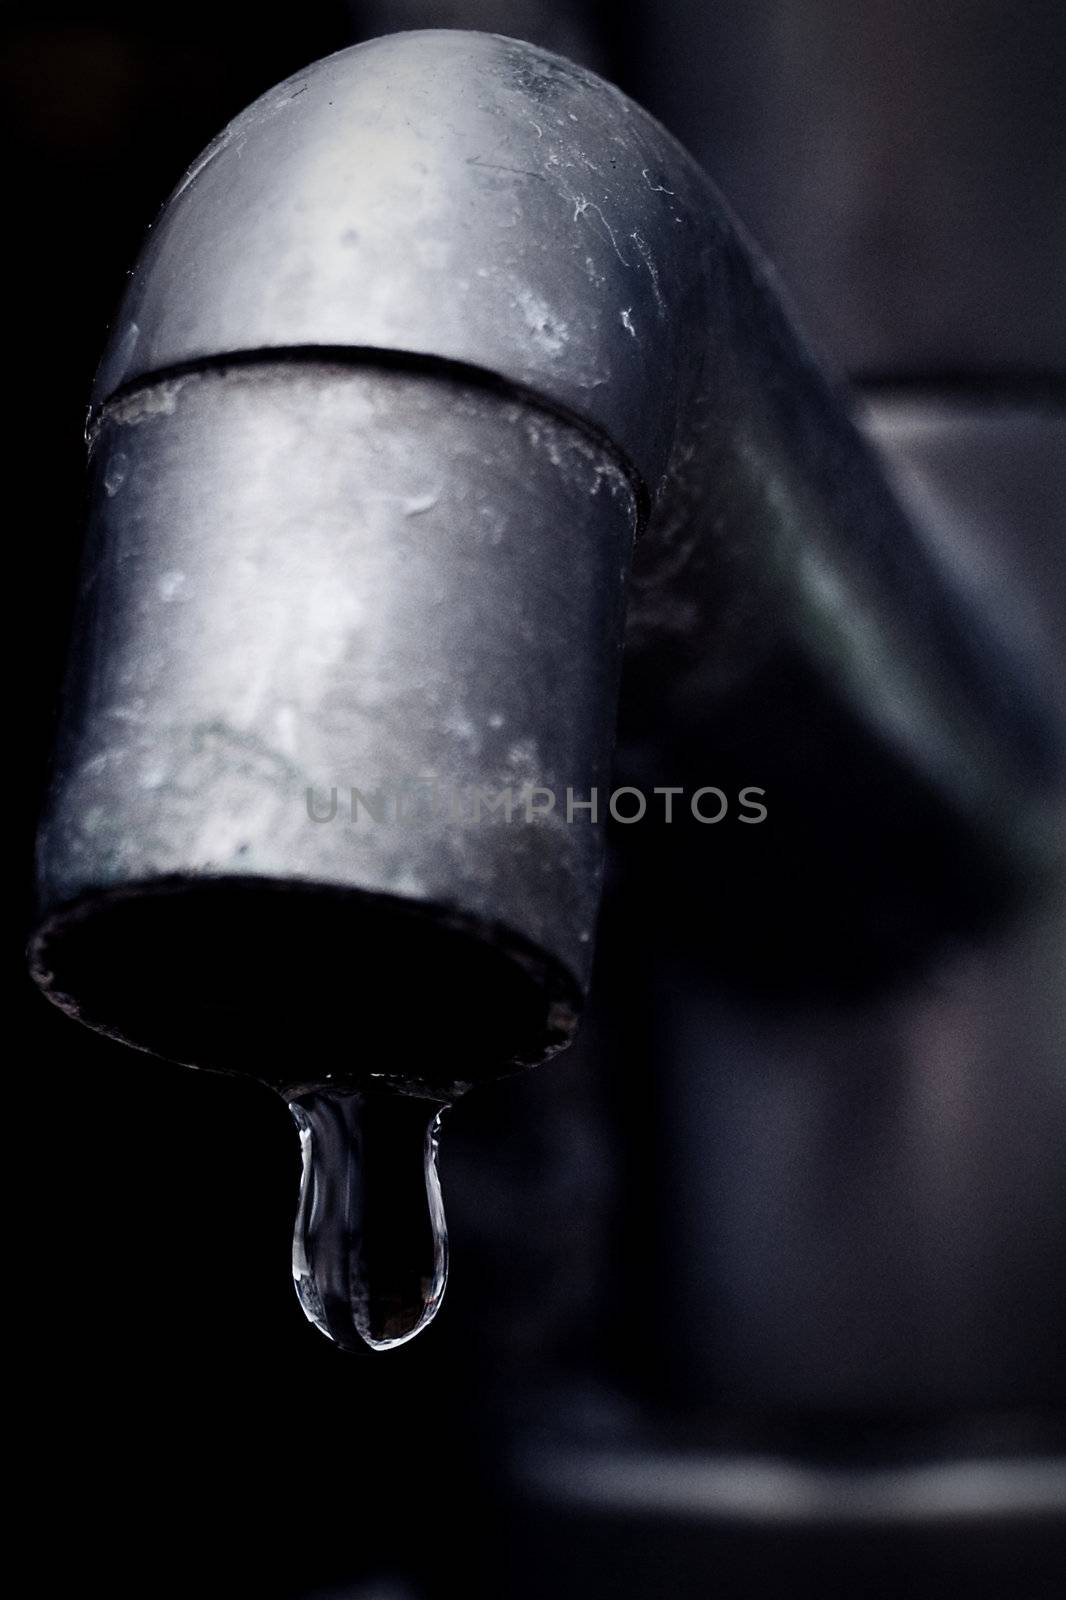 Old leaky faucet focus on water drop by nihues